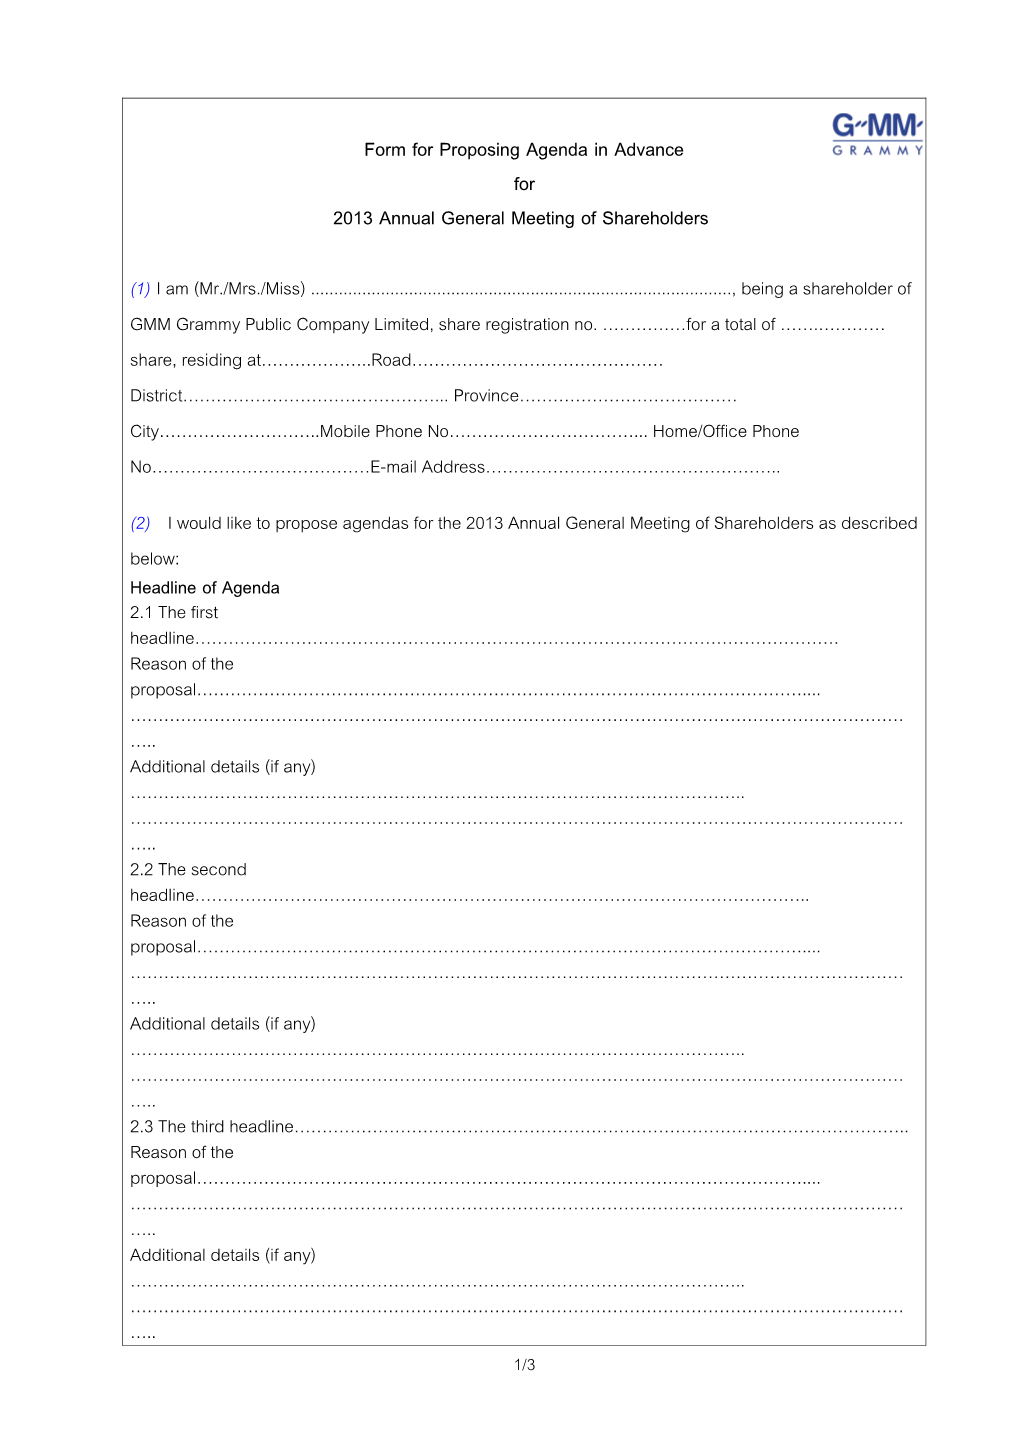 Form for Proposing Agenda in Advance